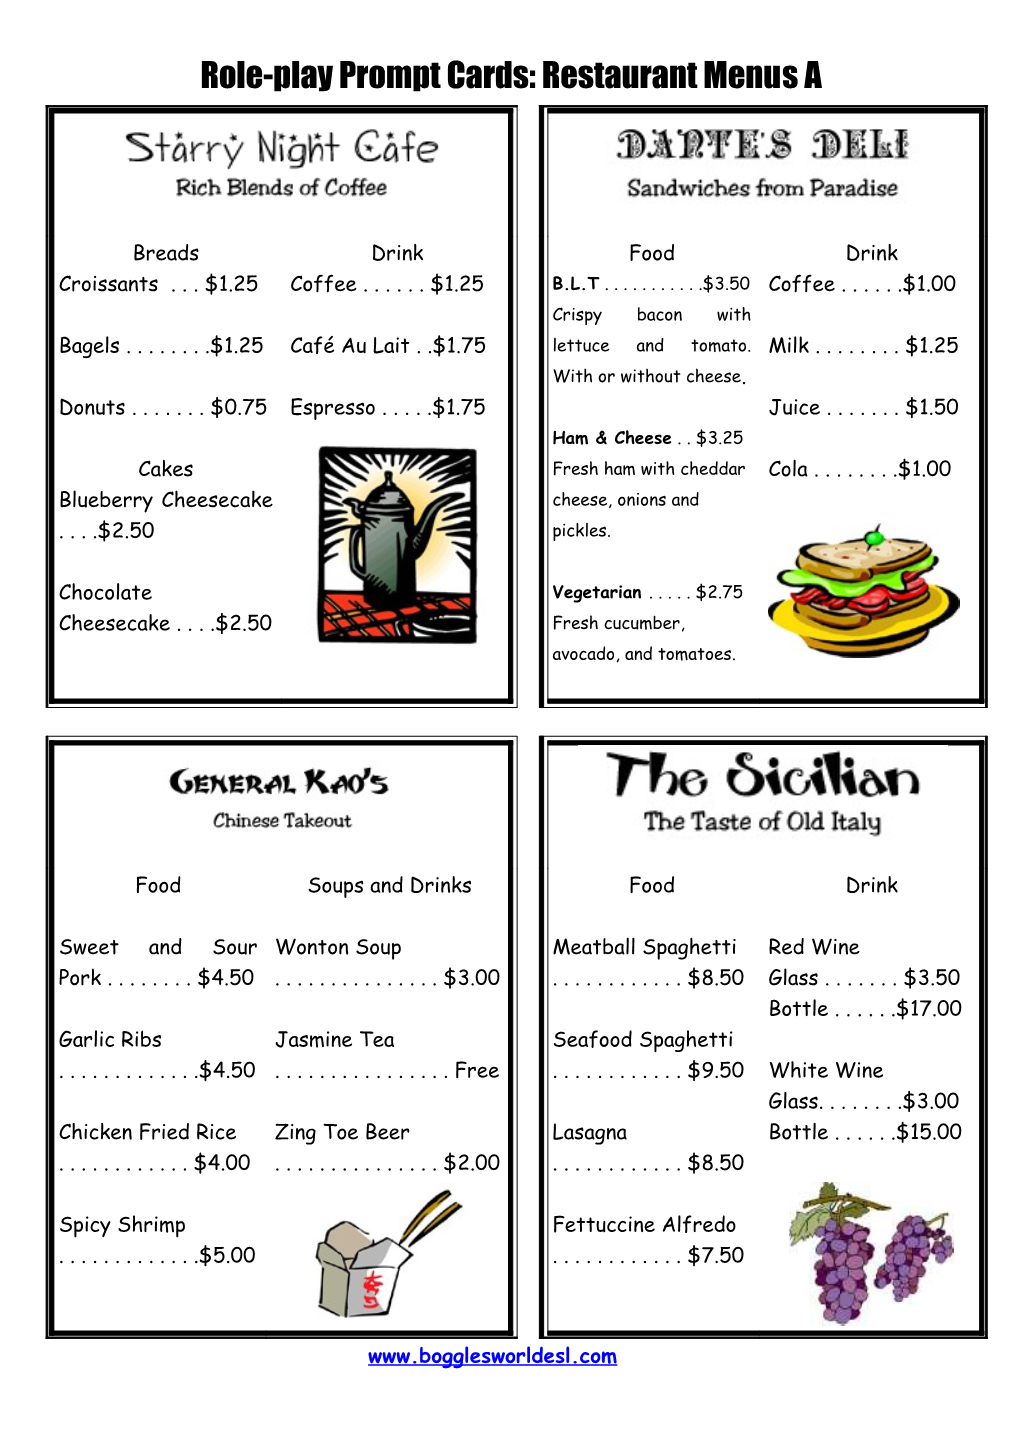 Role-Play Prompt Cards: Restaurant Menus A